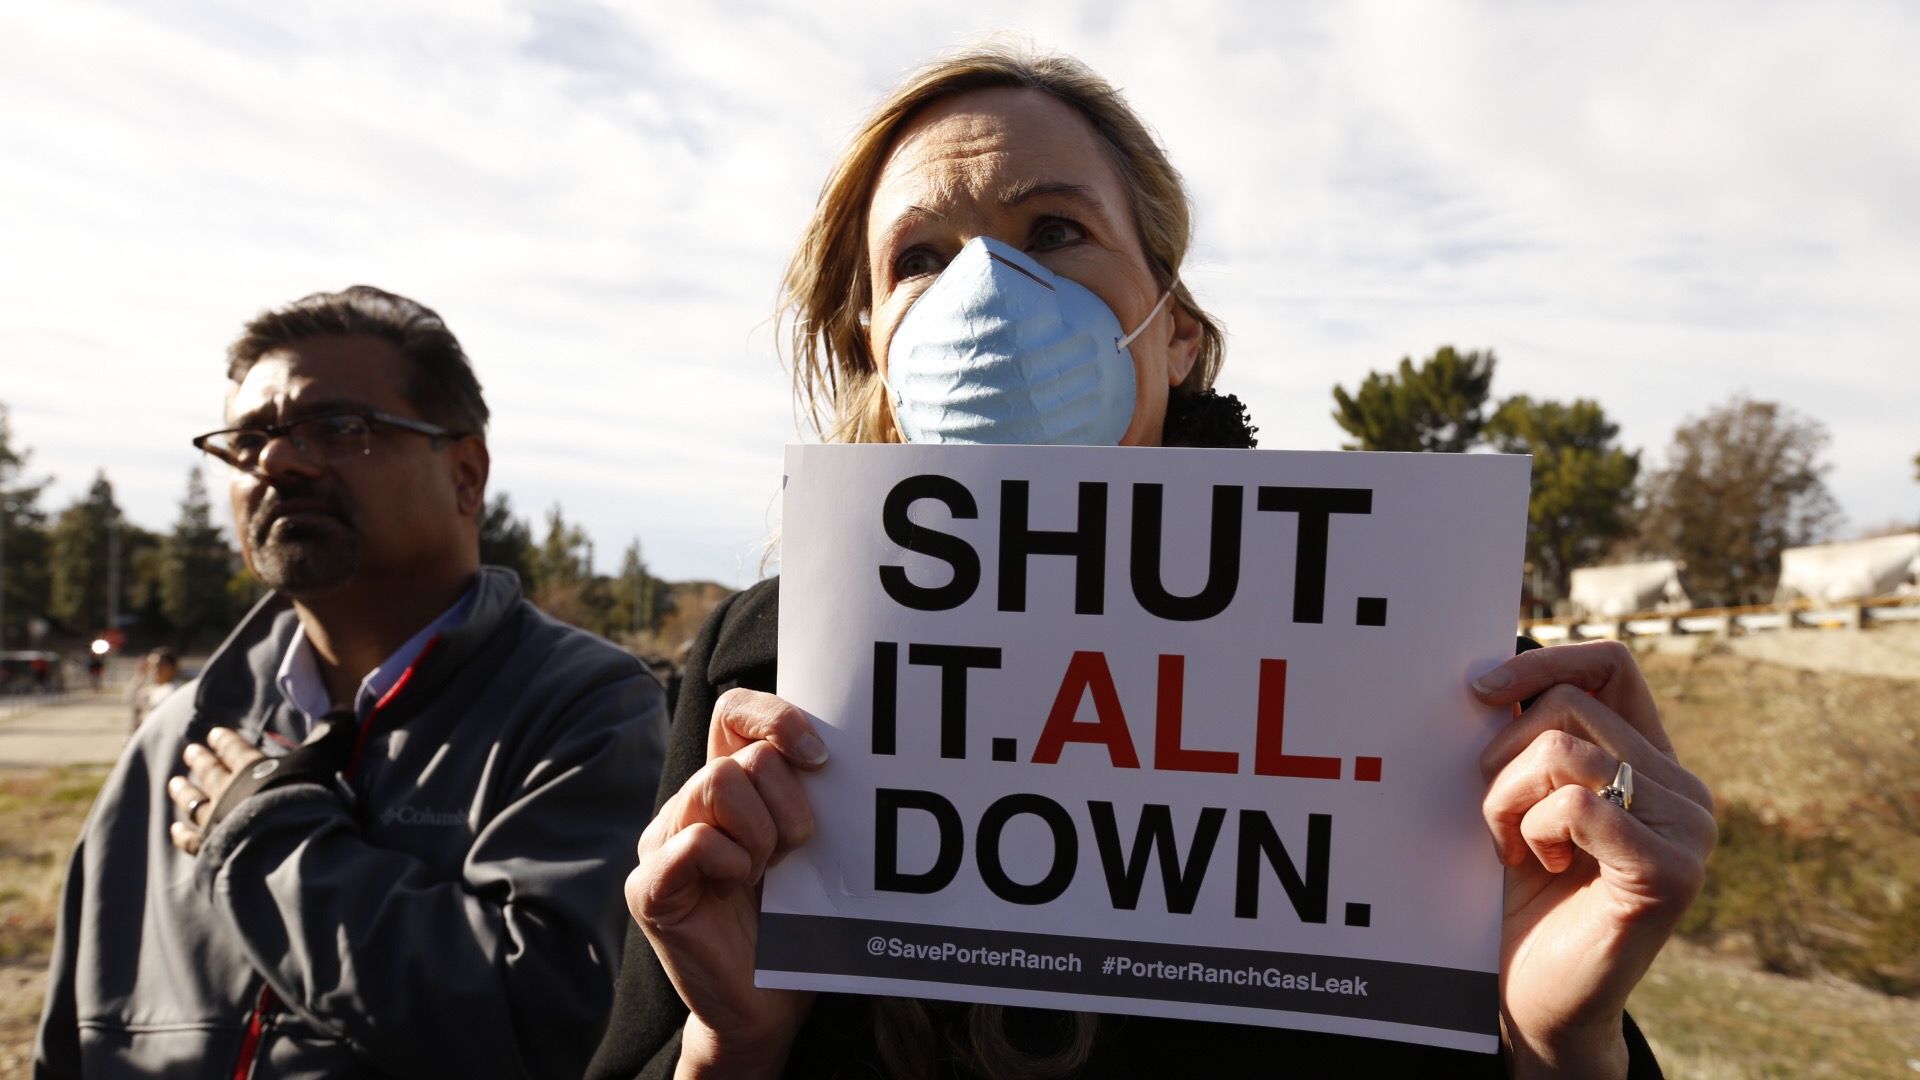 An evacuee with Save Porter Ranch holds a sign to "shut it all down" outside Southern California Gas Company's Aliso Canyon gate in Porter Ranch over the continuing gas leak in 2016 